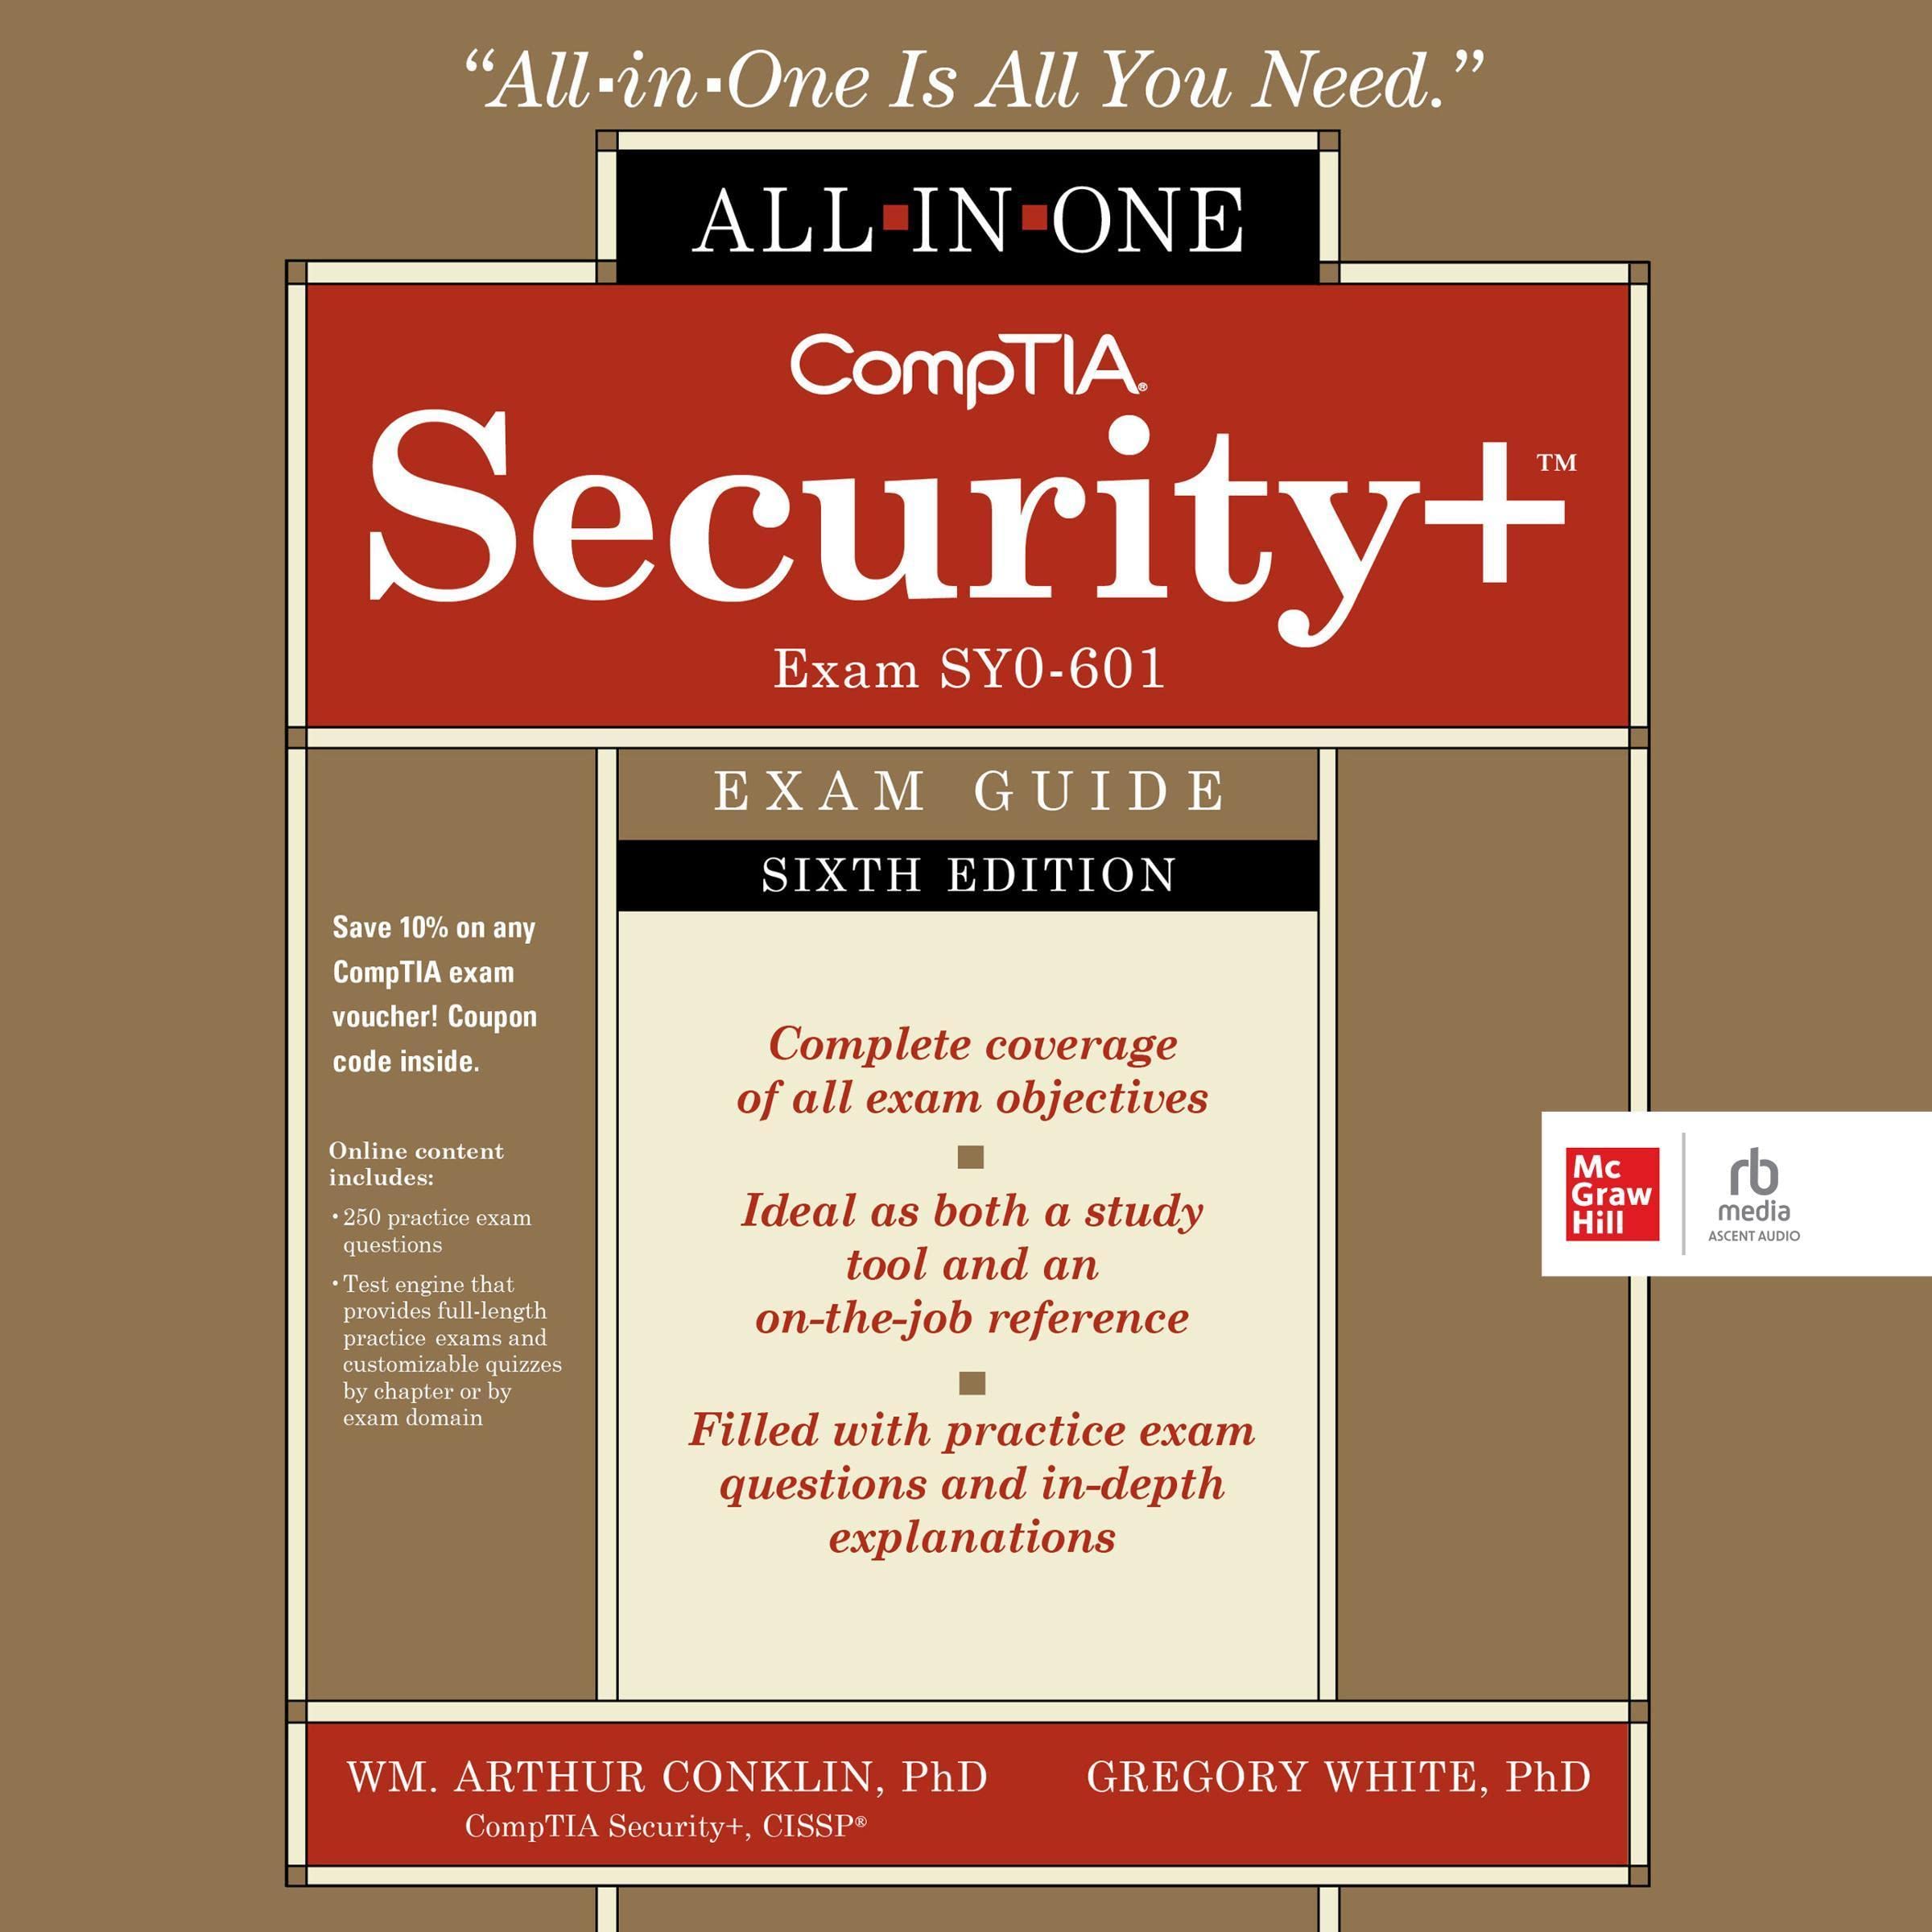 CompTIA Security+ All-in-One Exam Guide Exam SY0-601 (Sixth Edition)